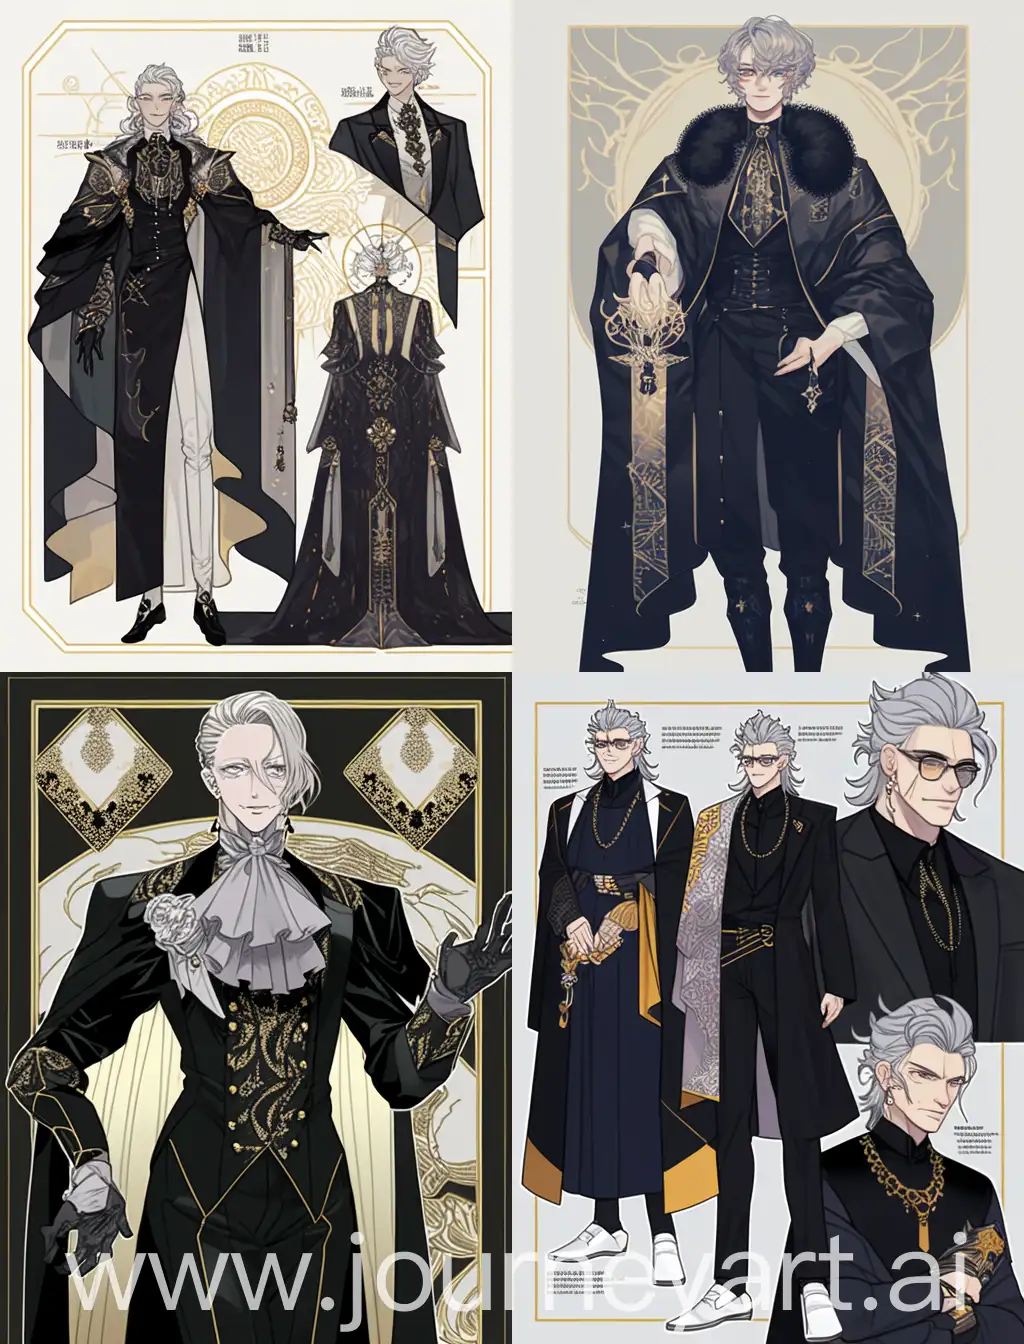 list of characters, anime, ancient Greek fashionable outfit, luxurious modern clothes, short unruly gray hair, pink eyes, empty look, evil man, handsome, with pale skin, hands in black gloves, many layers, soft edges, illustrations, embossed layout, high detail, depth, many details, masterpiece